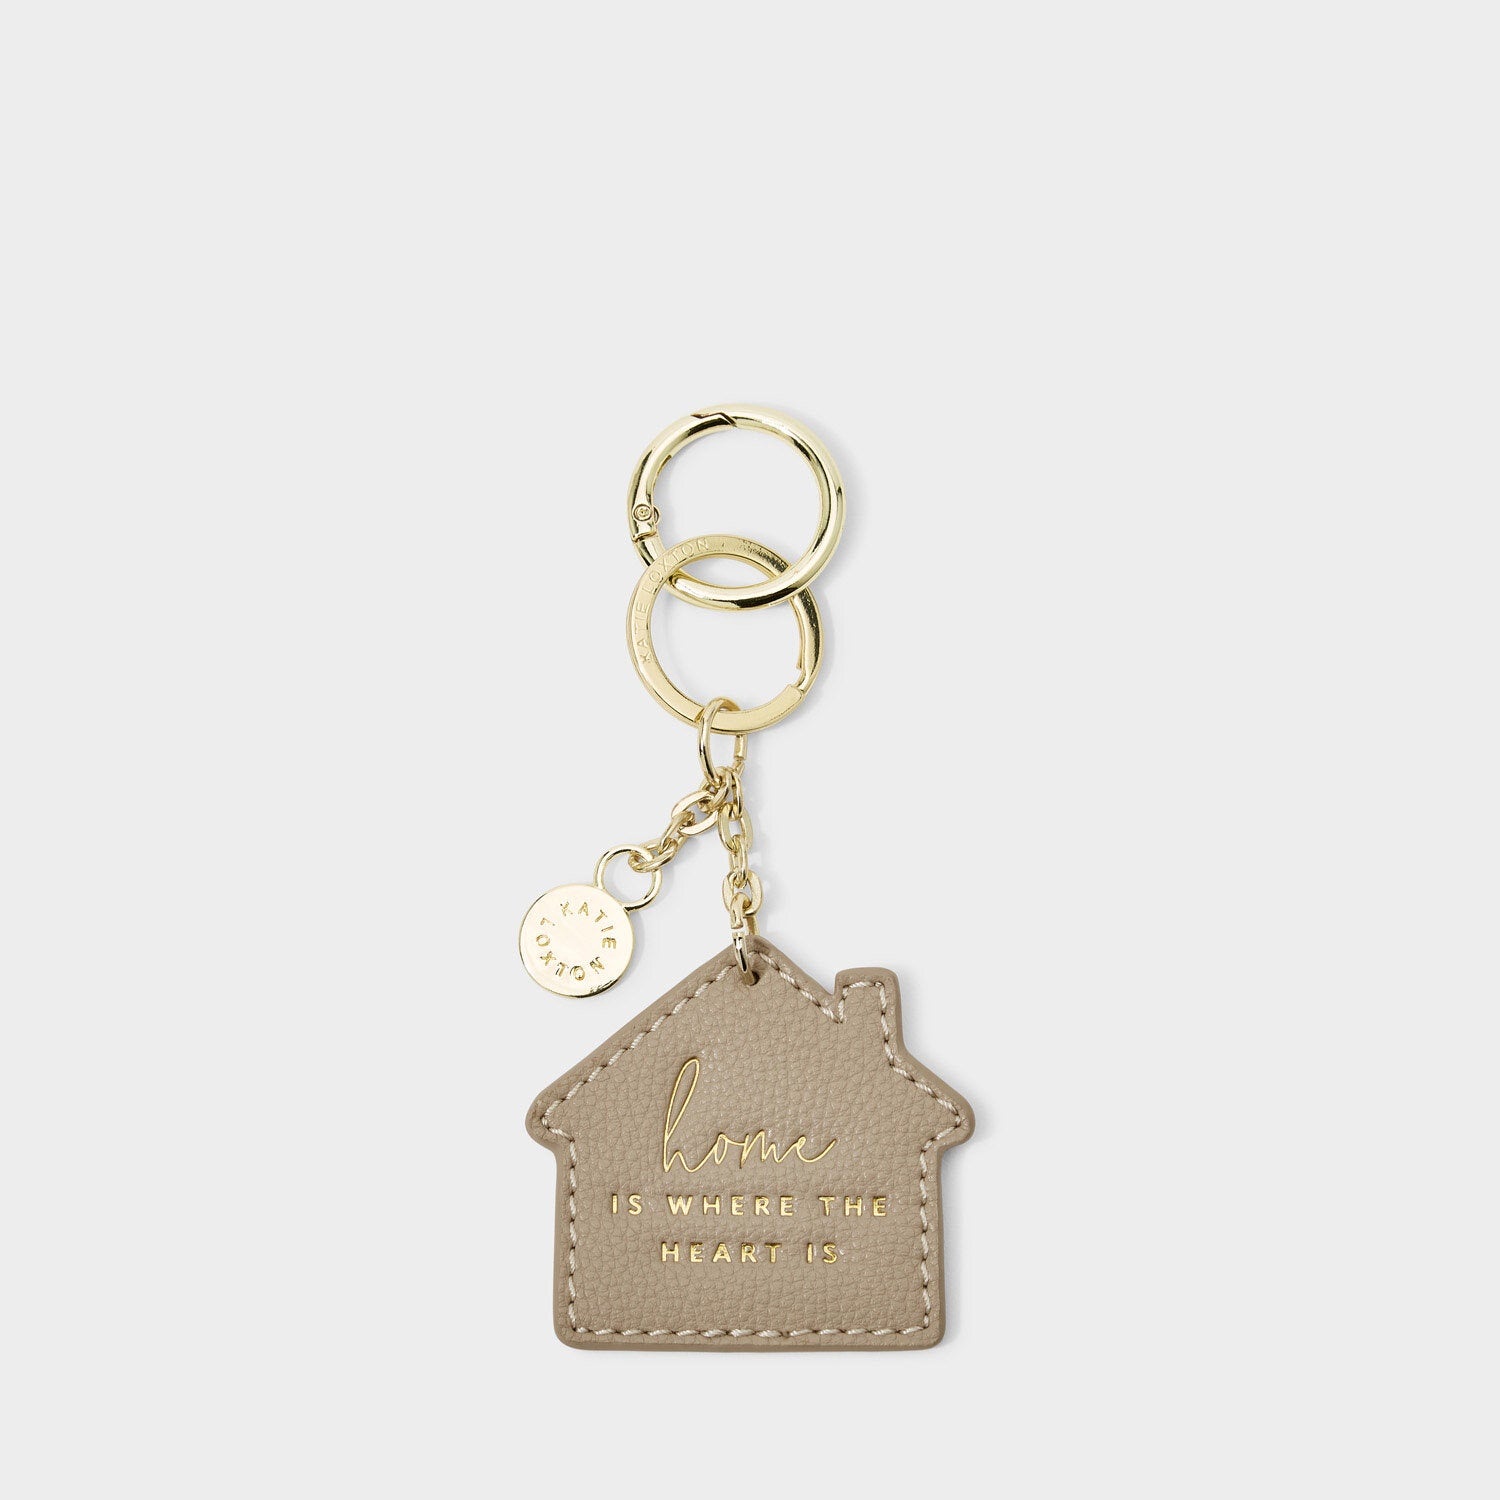 Home is Where the Heart Is Keychain